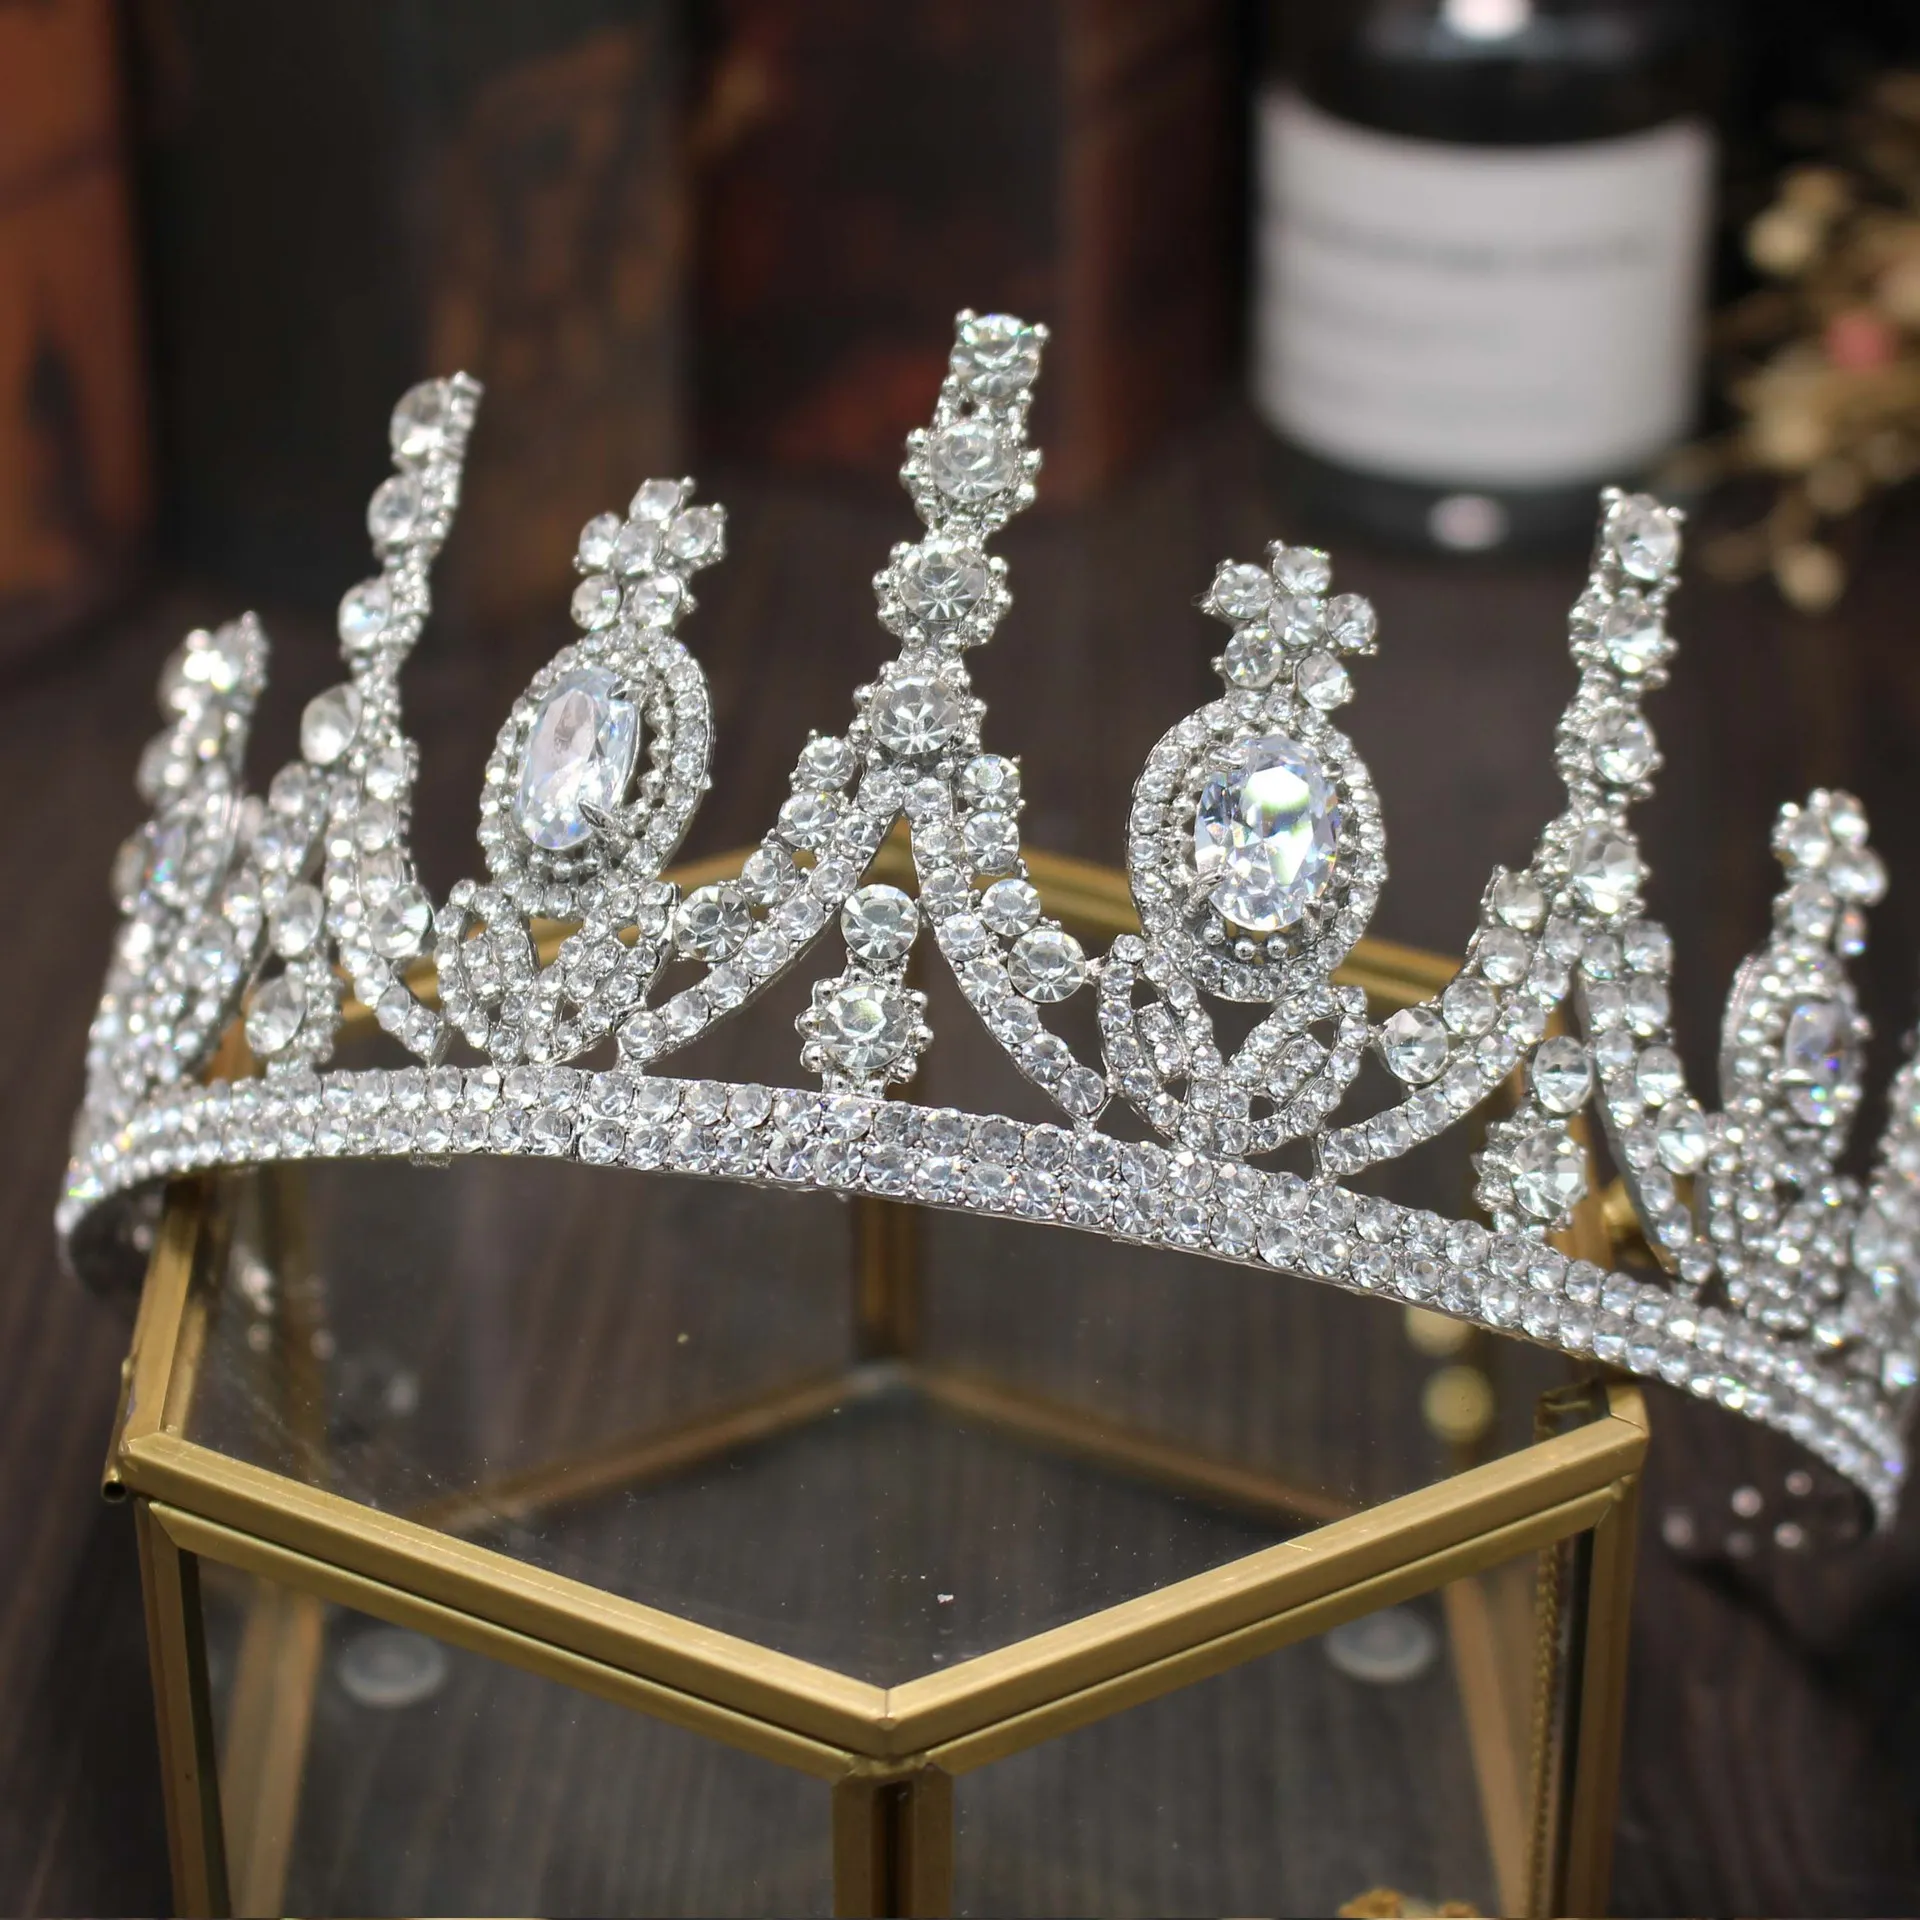 Bling Che Tiaras Crowns Wedding Hair Jewelry Crystal Wholesale Fashion Girls Evening Prom Party Dresses Accessories Headpieces